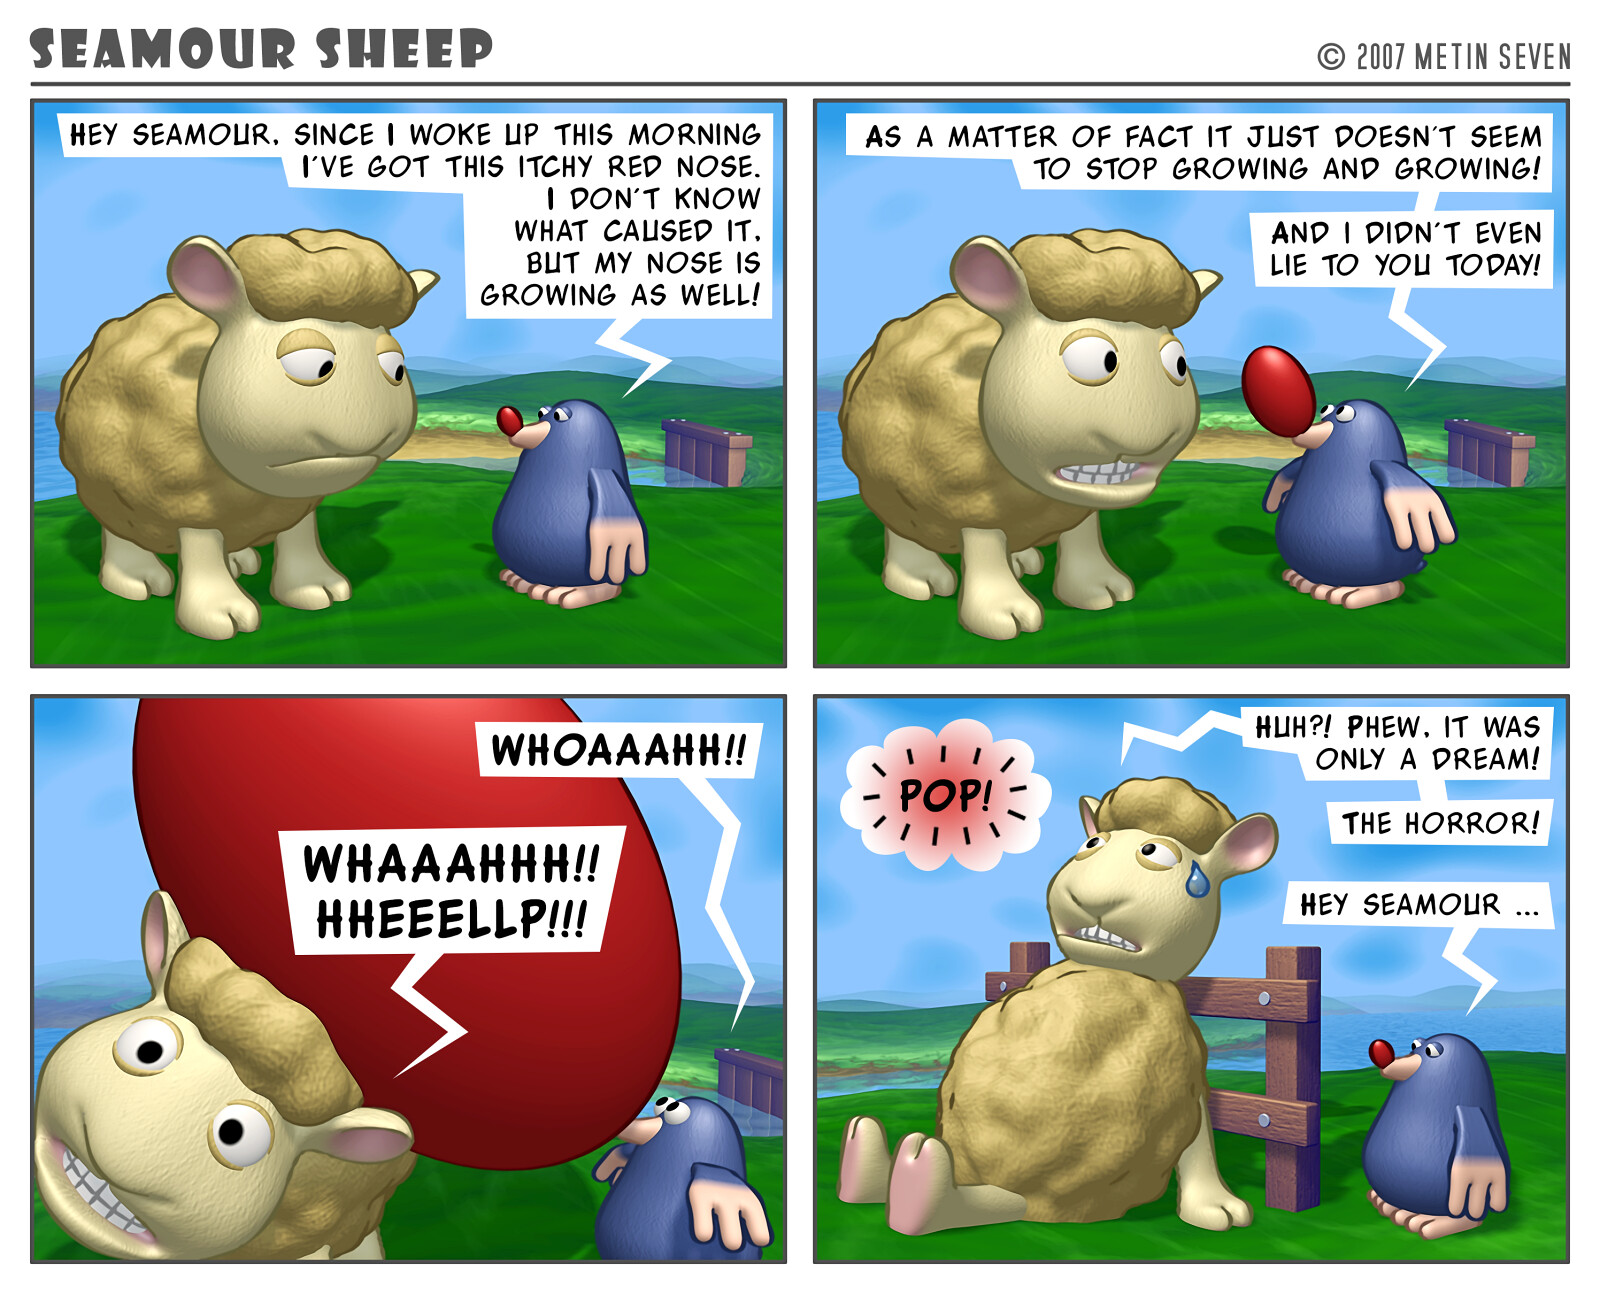 Seamour Sheep and Marty Mole comic strip episode: Red nose